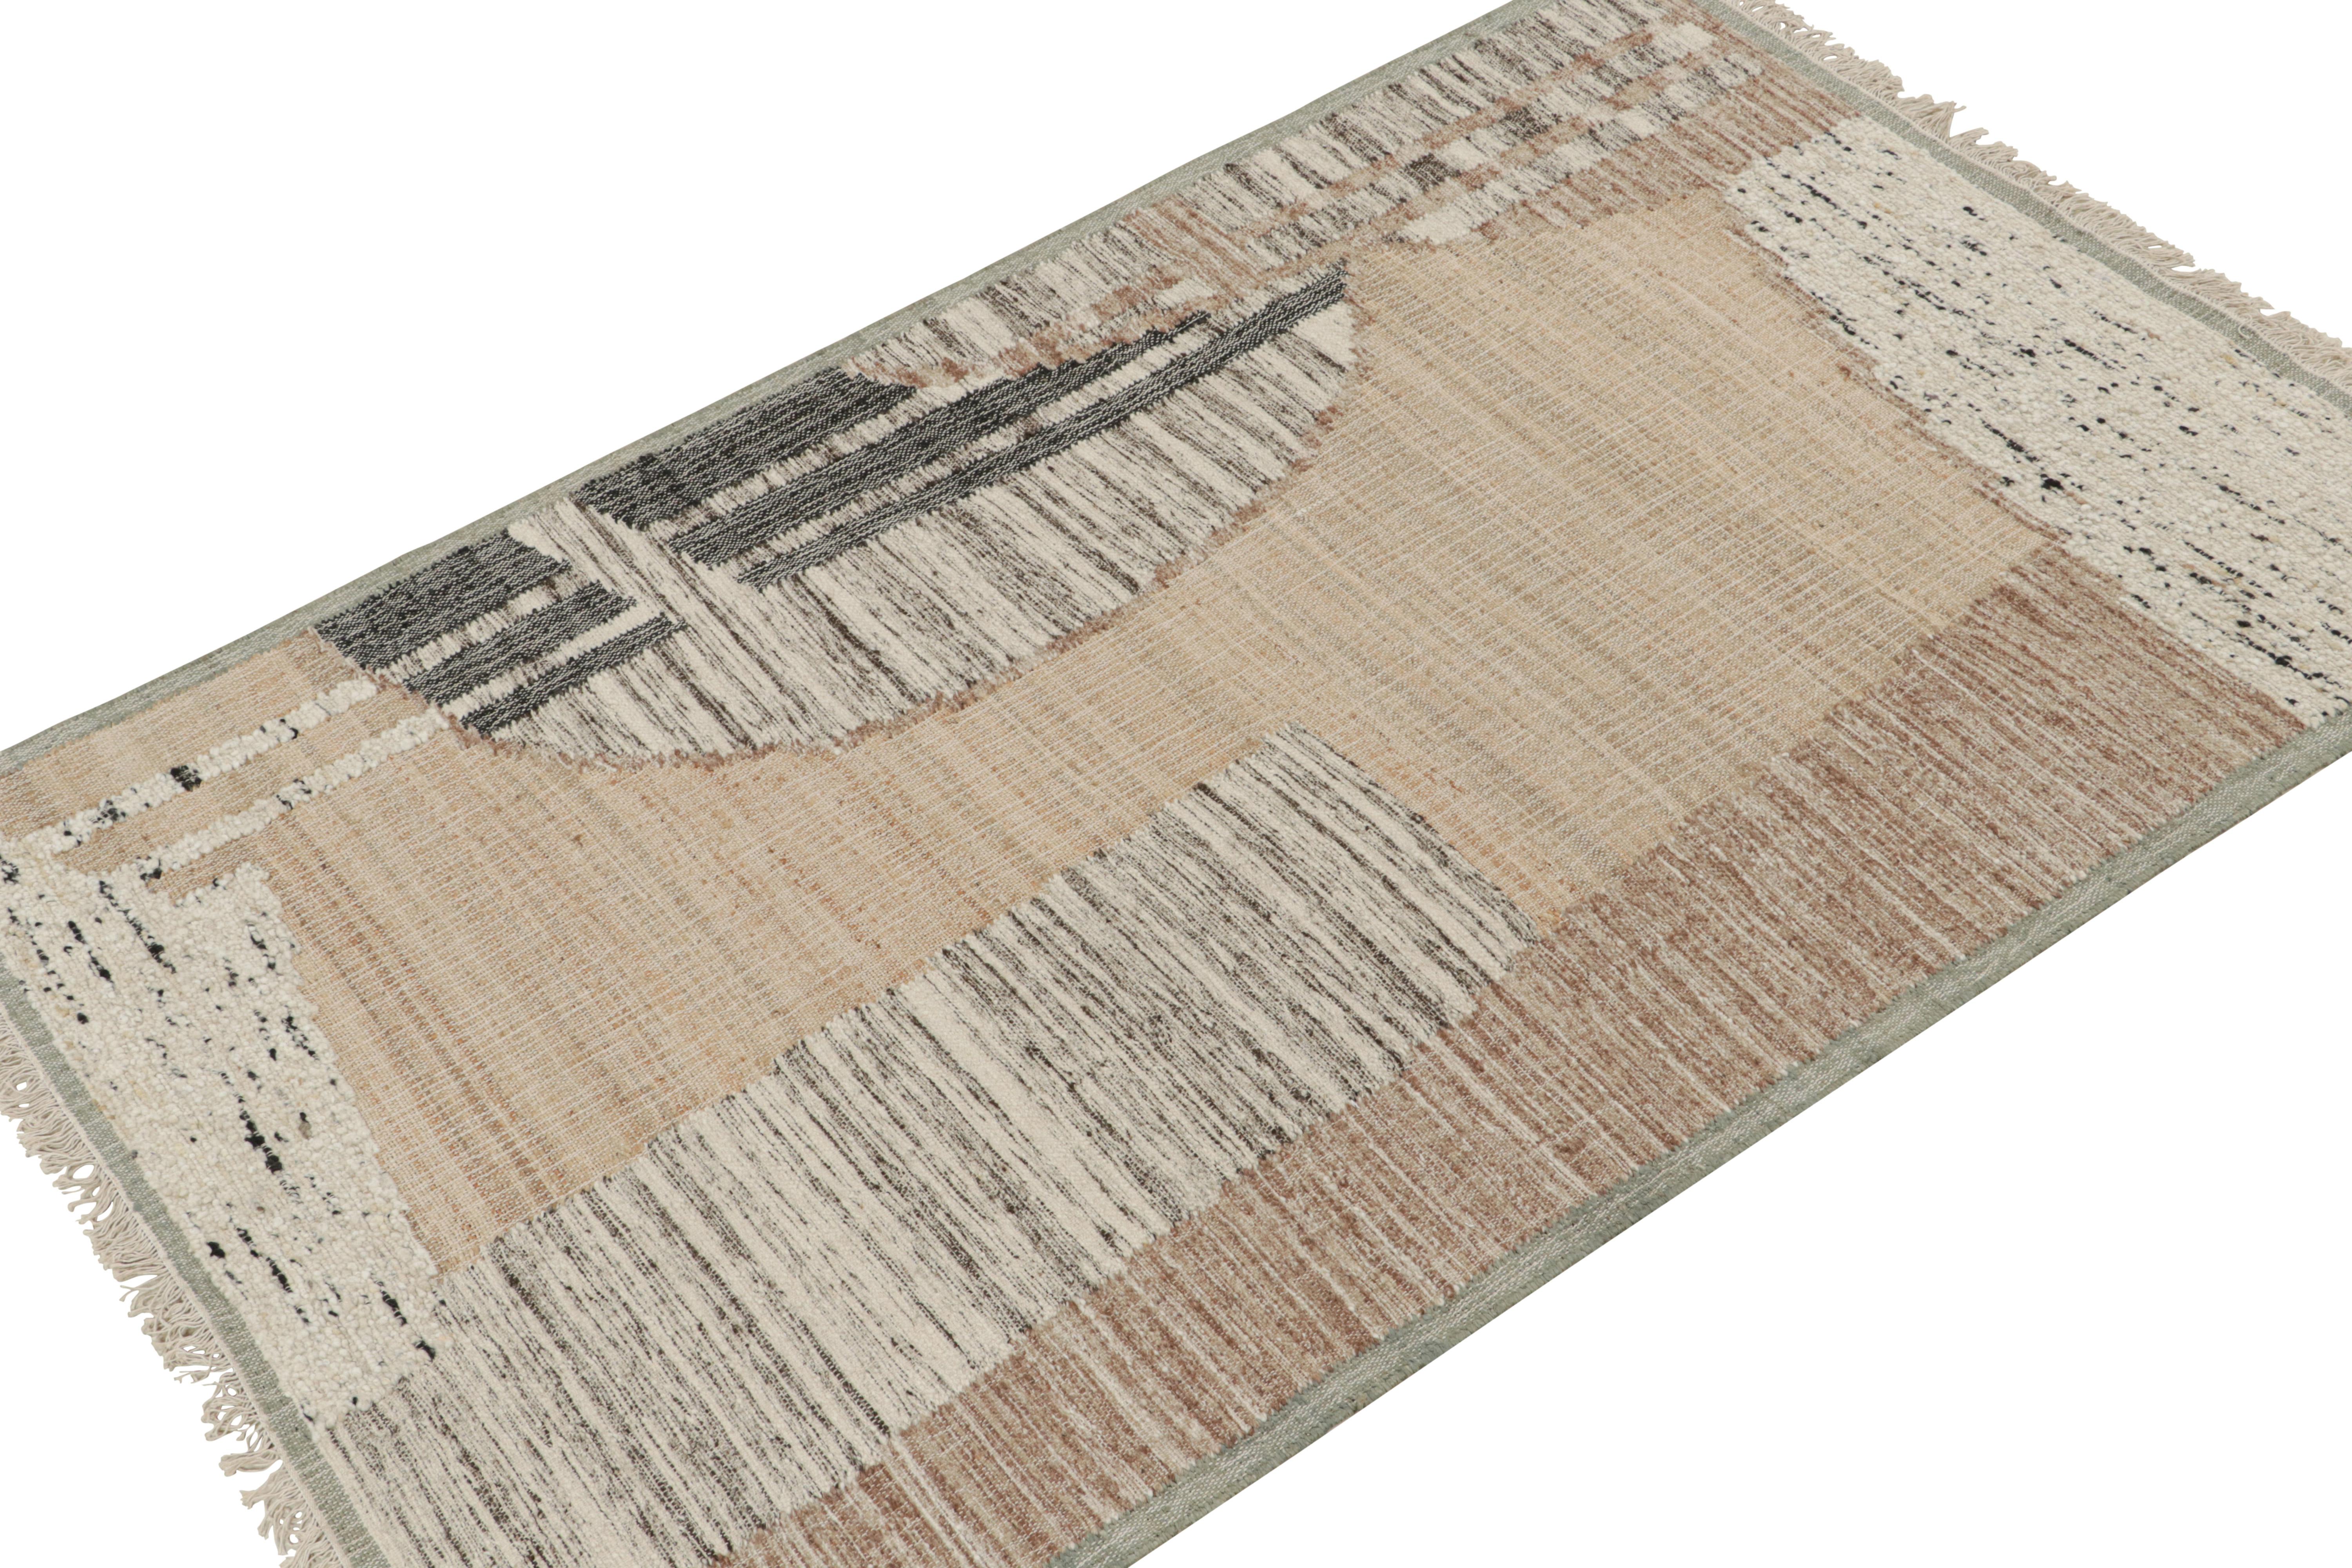 Handwoven in wool & jute, this 5x8 piece is a grand new entry to Rug & Kilim’s modern flatweave collection.

On the Design: 

The kilim rug carries an abstract design in brown, white & black. The aesthetics of the piece further enjoy a brilliant